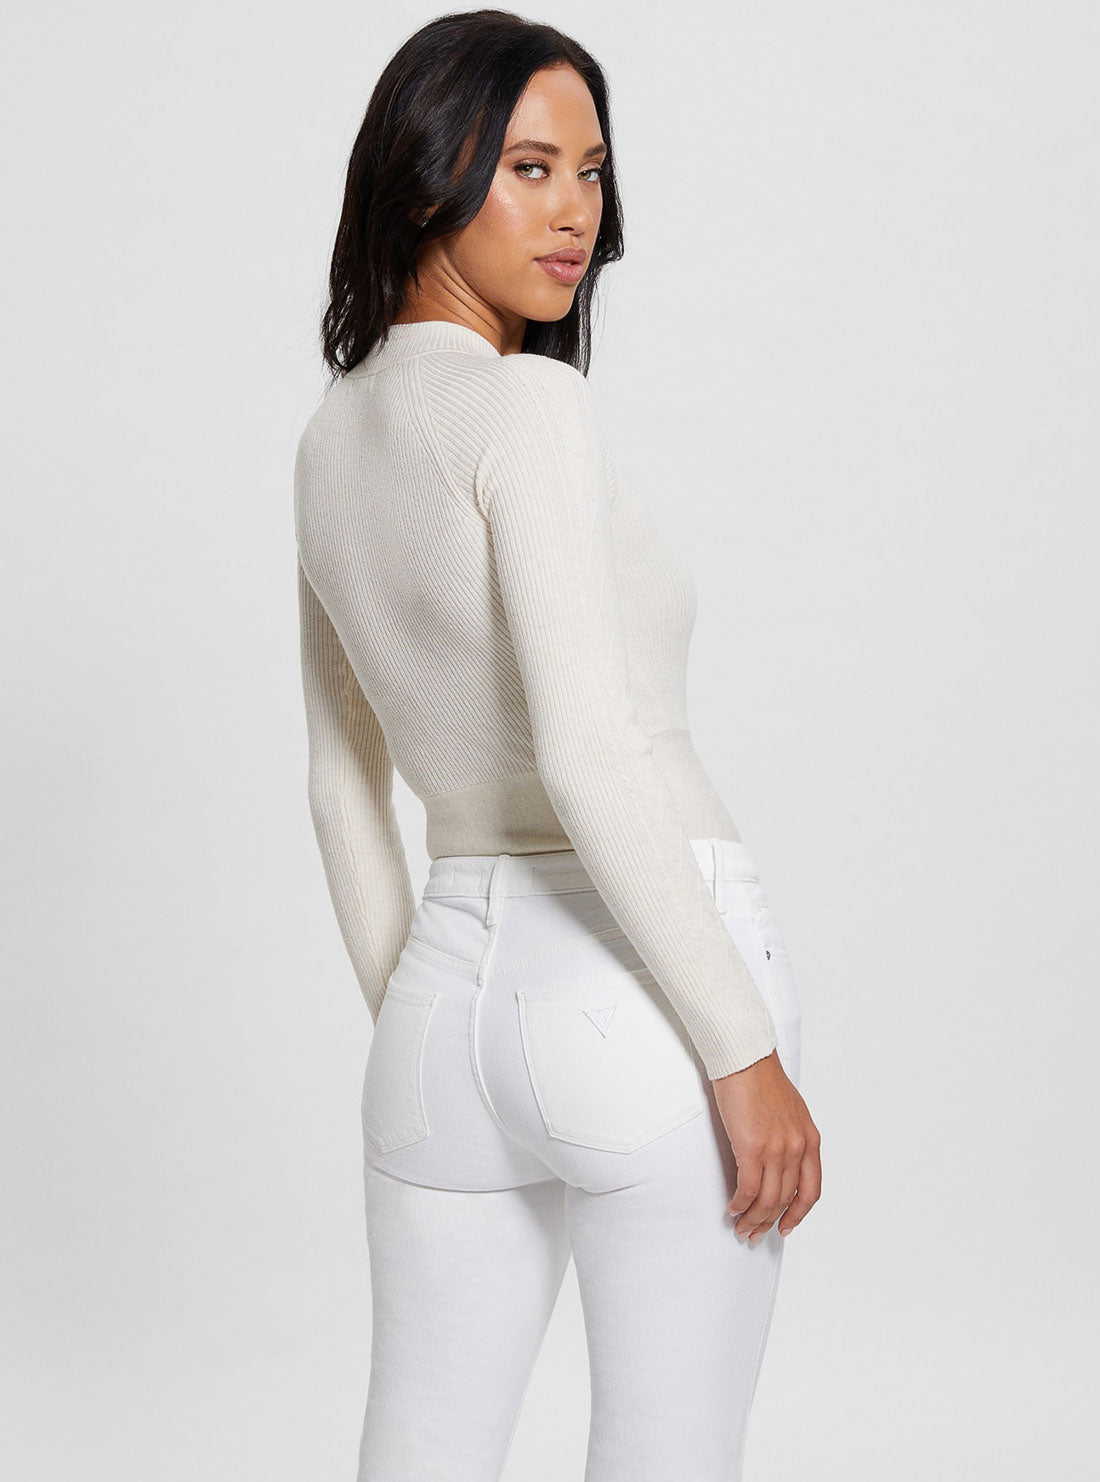 White Melodie Long Sleeve Knit Top | GUESS Women's Apparel | back view